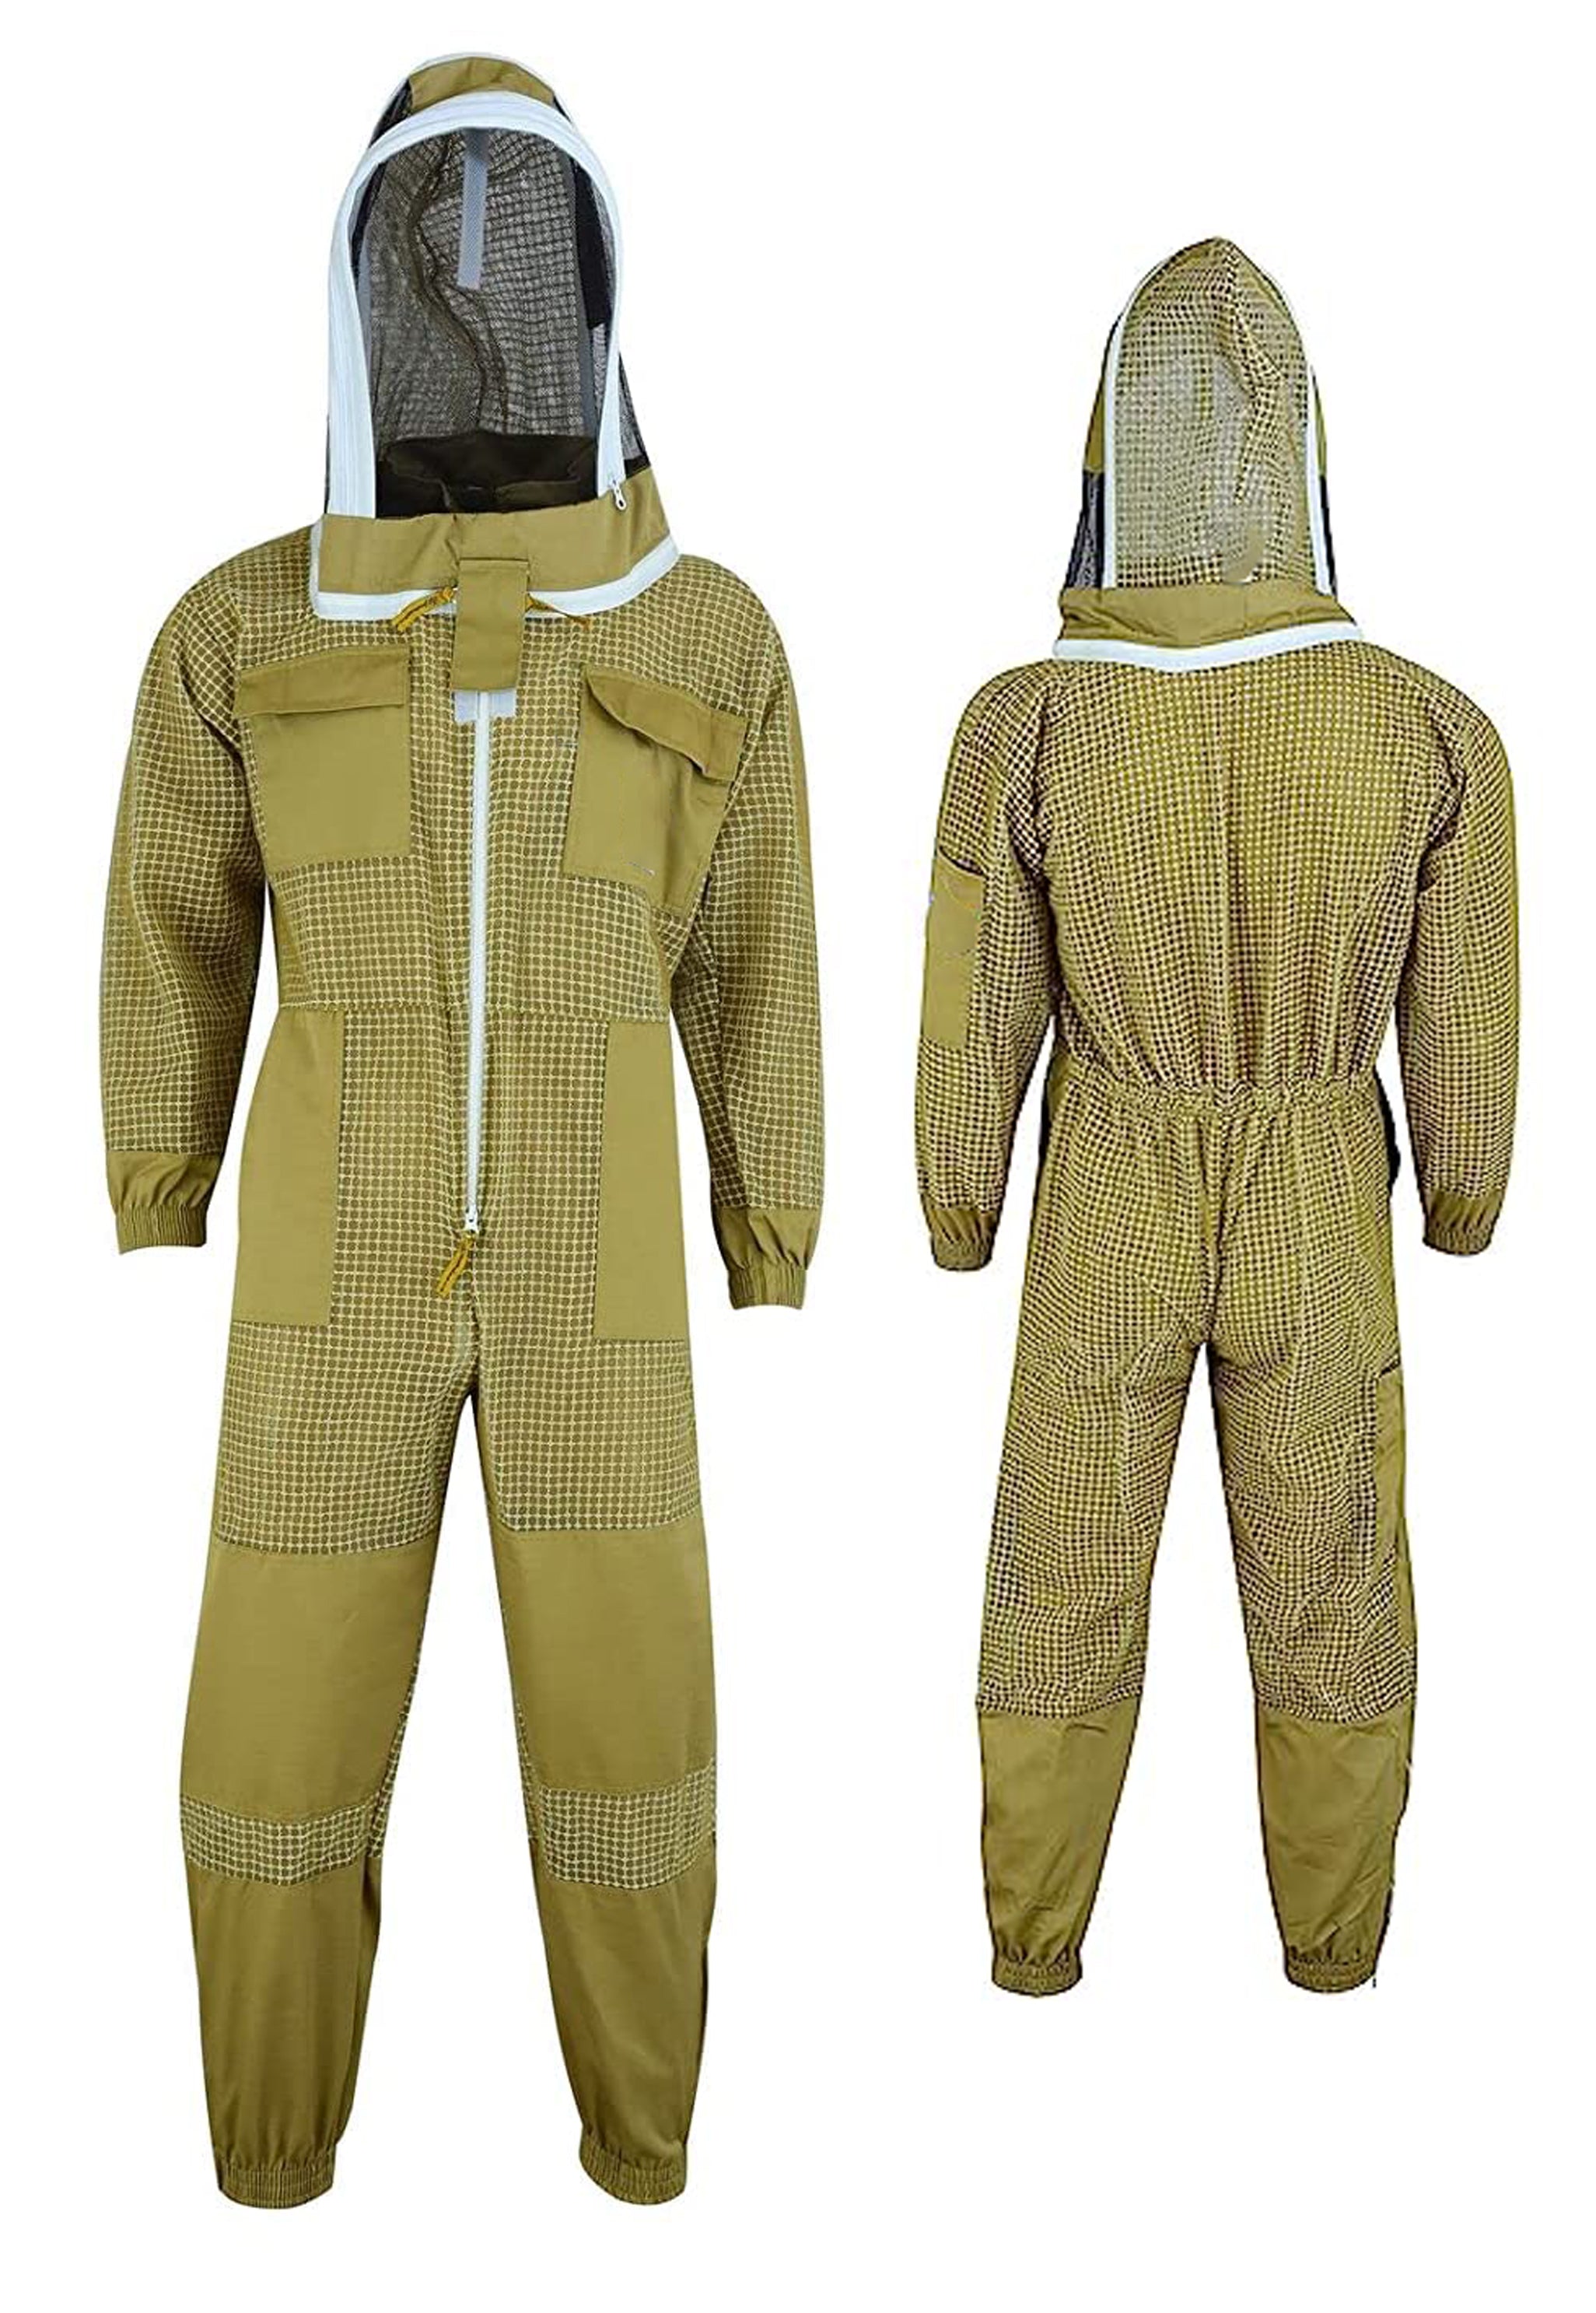 Get Suited & bee a pro with our ventilated Bee Suit [ON SALE]